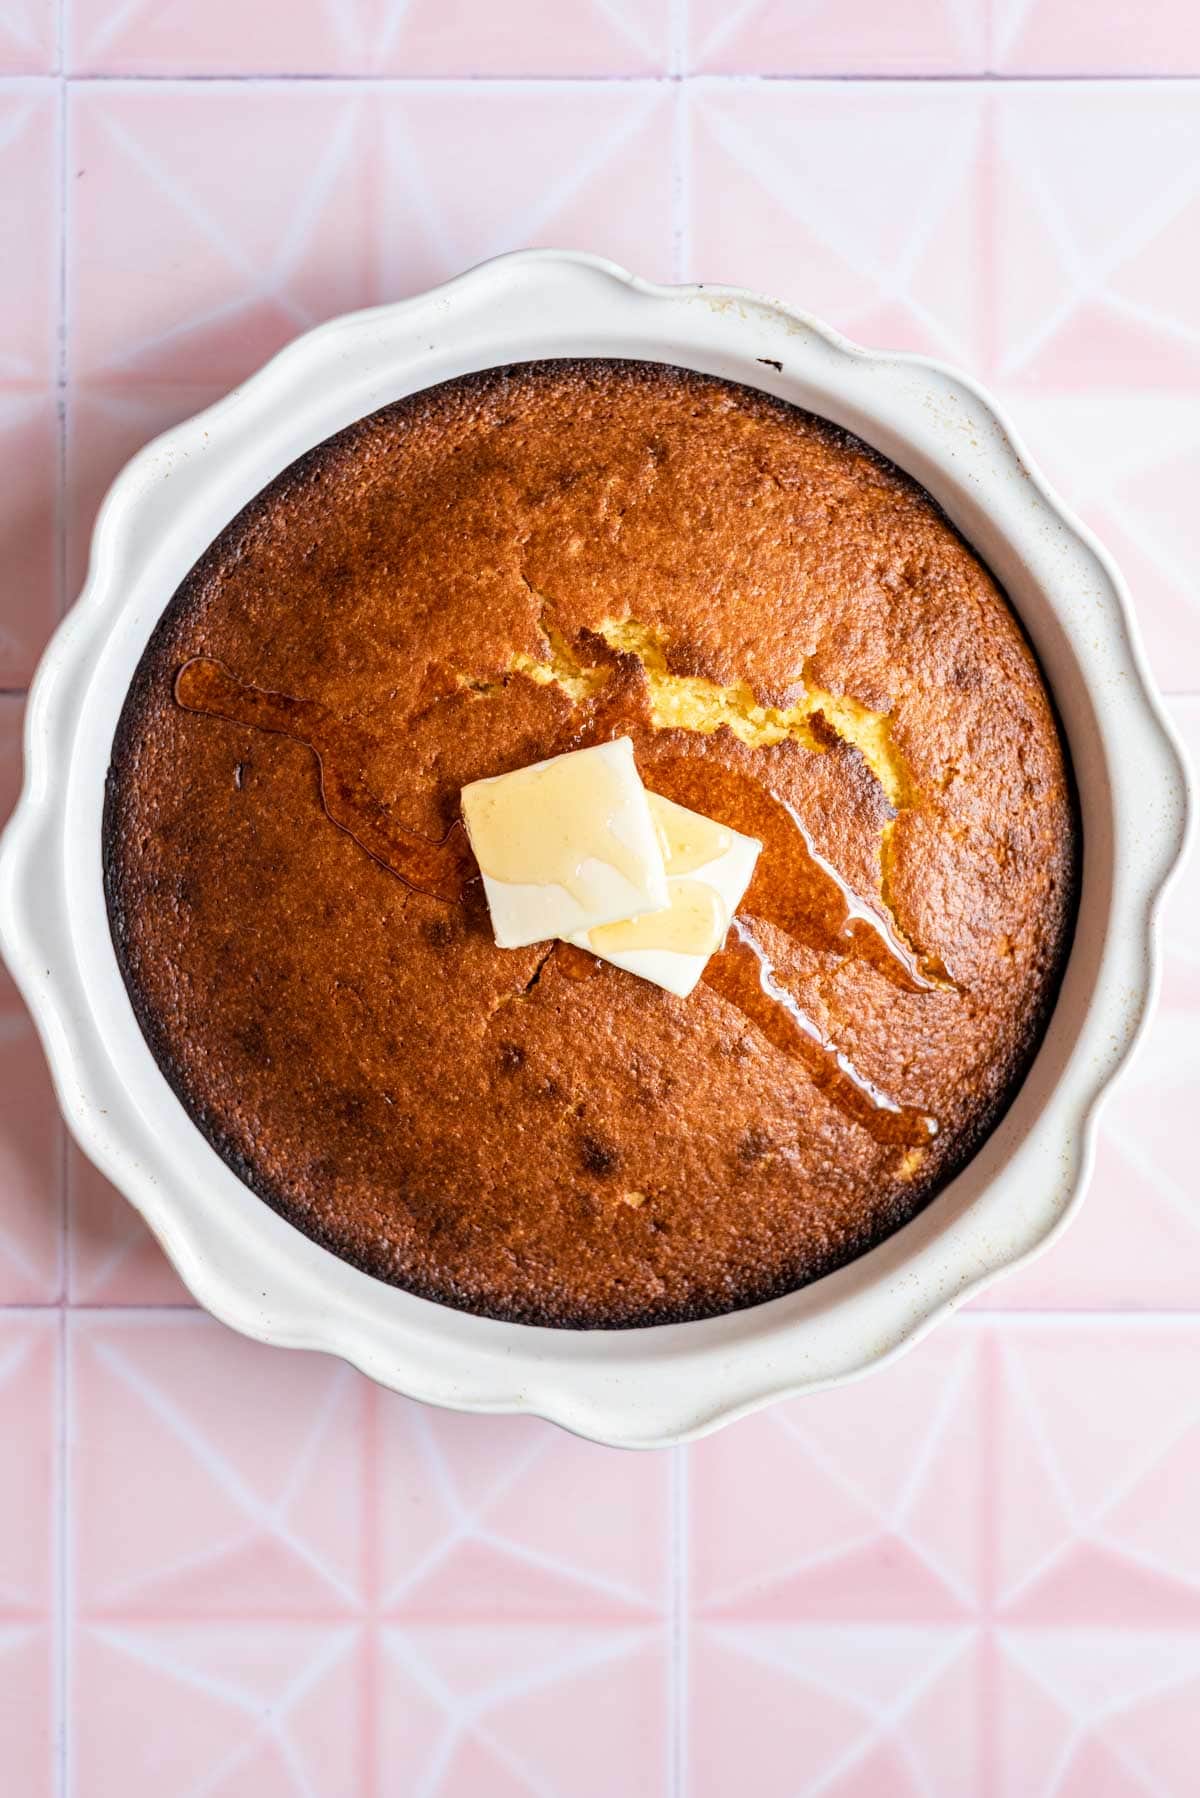 Jiffy cornbread in a circular baking dish with two slices of butter and a drizzle of honey on a pink tile table.